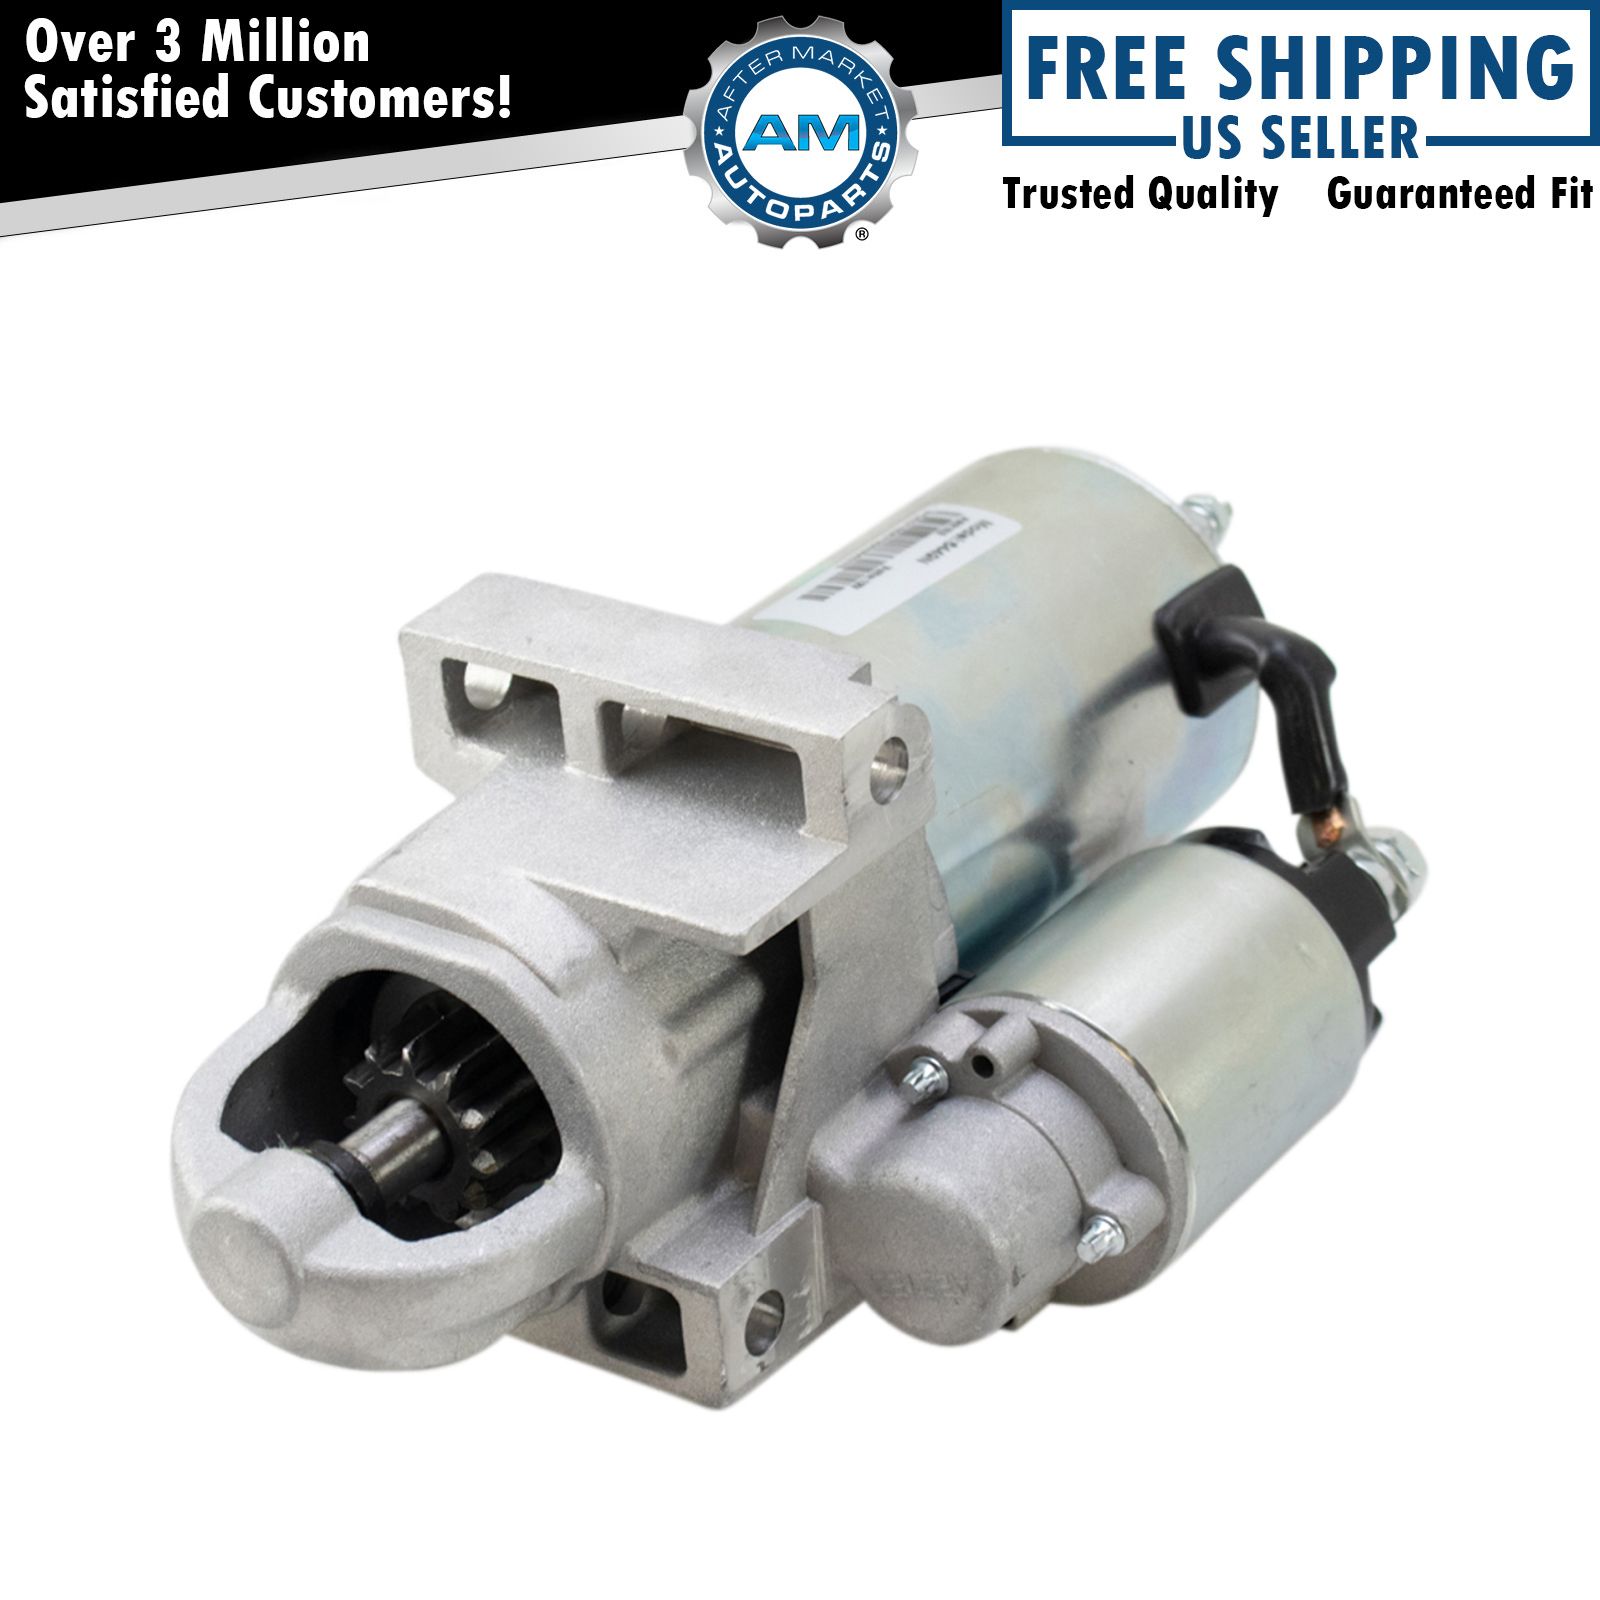 New Replacement Starter Motor for GMC Isuzu Cadillac Chevy Pickup Truck Olds